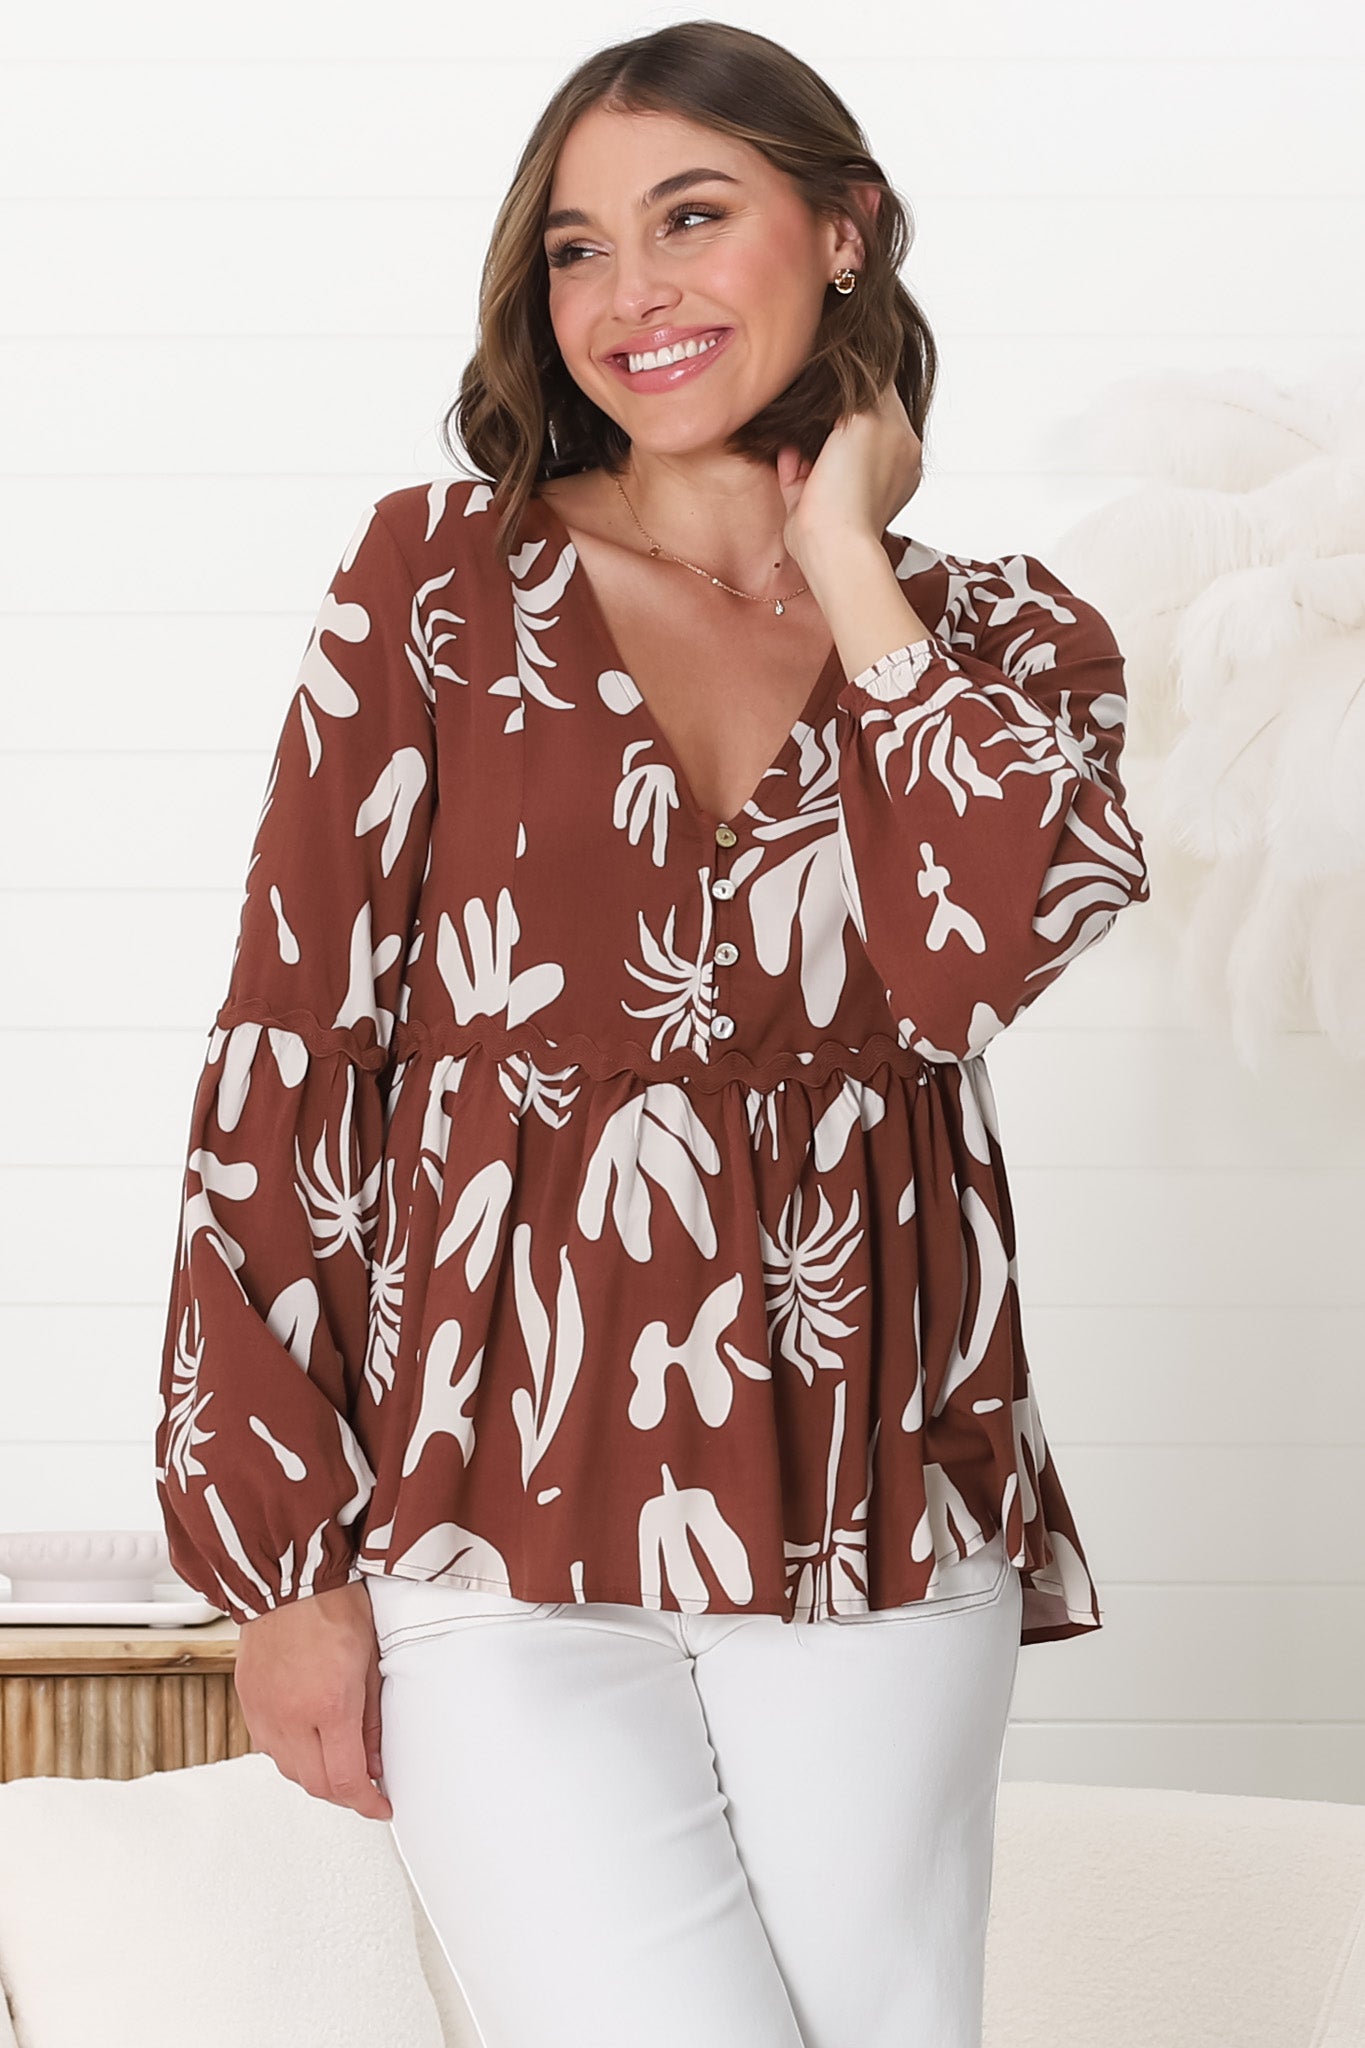 Hills Blouse - Buttoned Bodice Rick Rack Detail Smock Blouse in Wells Print Brown